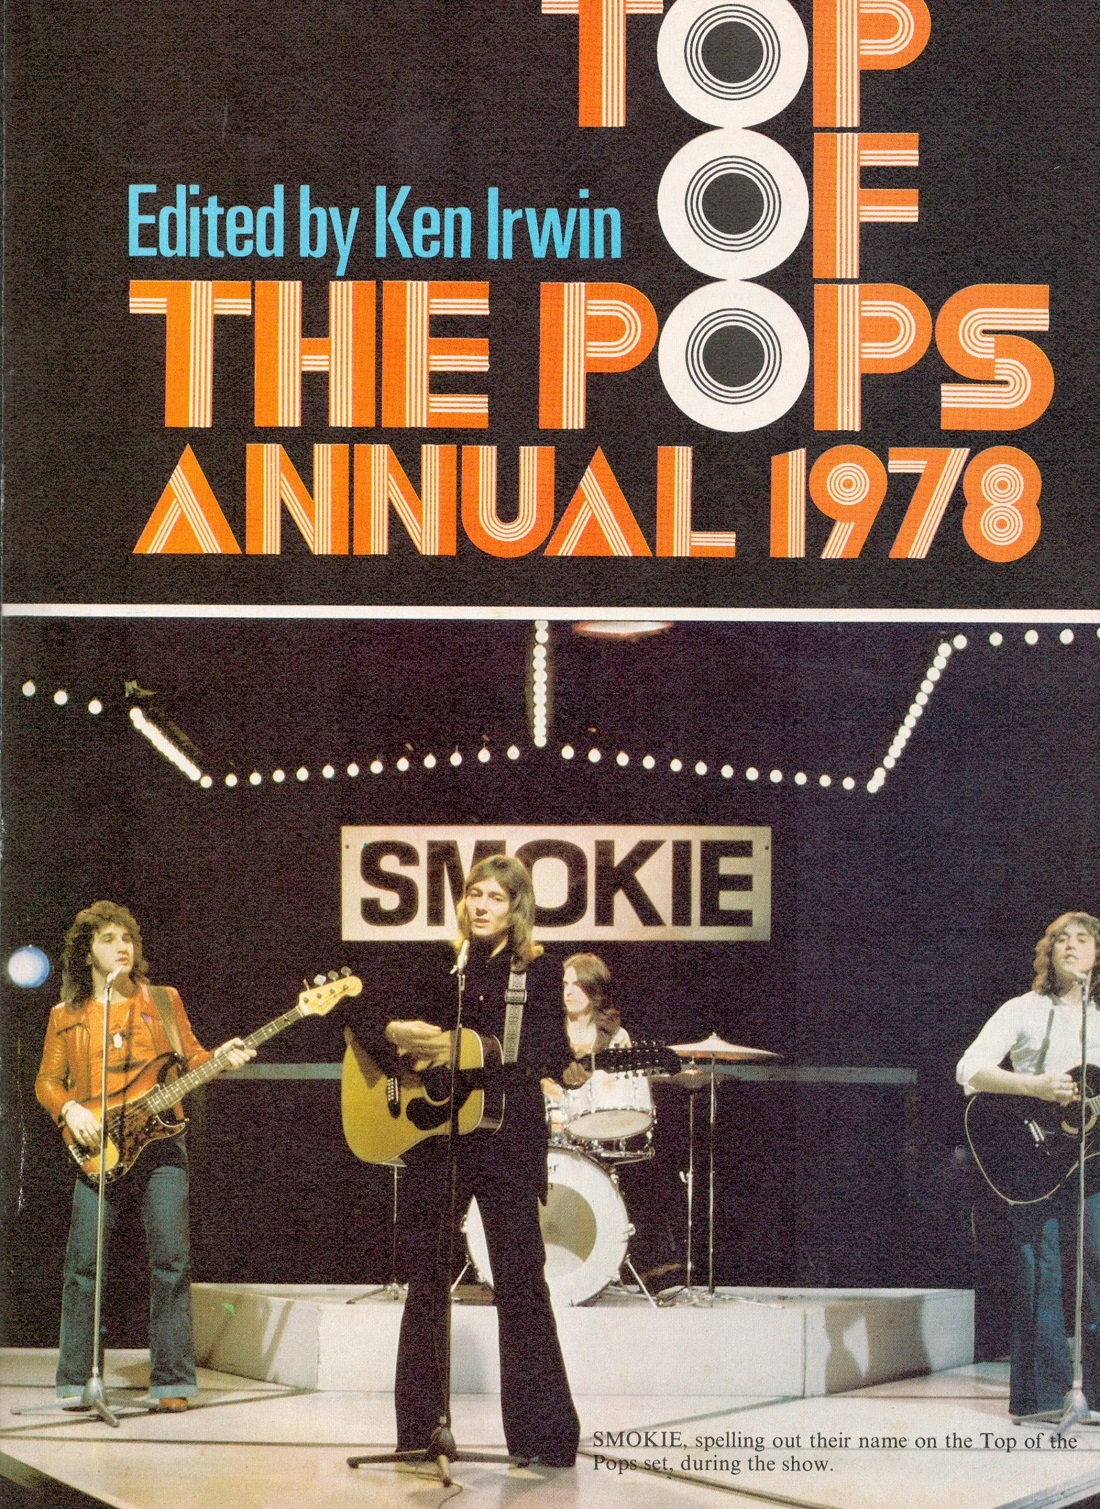 Top of The Pops Annual 1978 edited by Ken Irwin Hardback Book published by World Distributers ( - Image 2 of 4